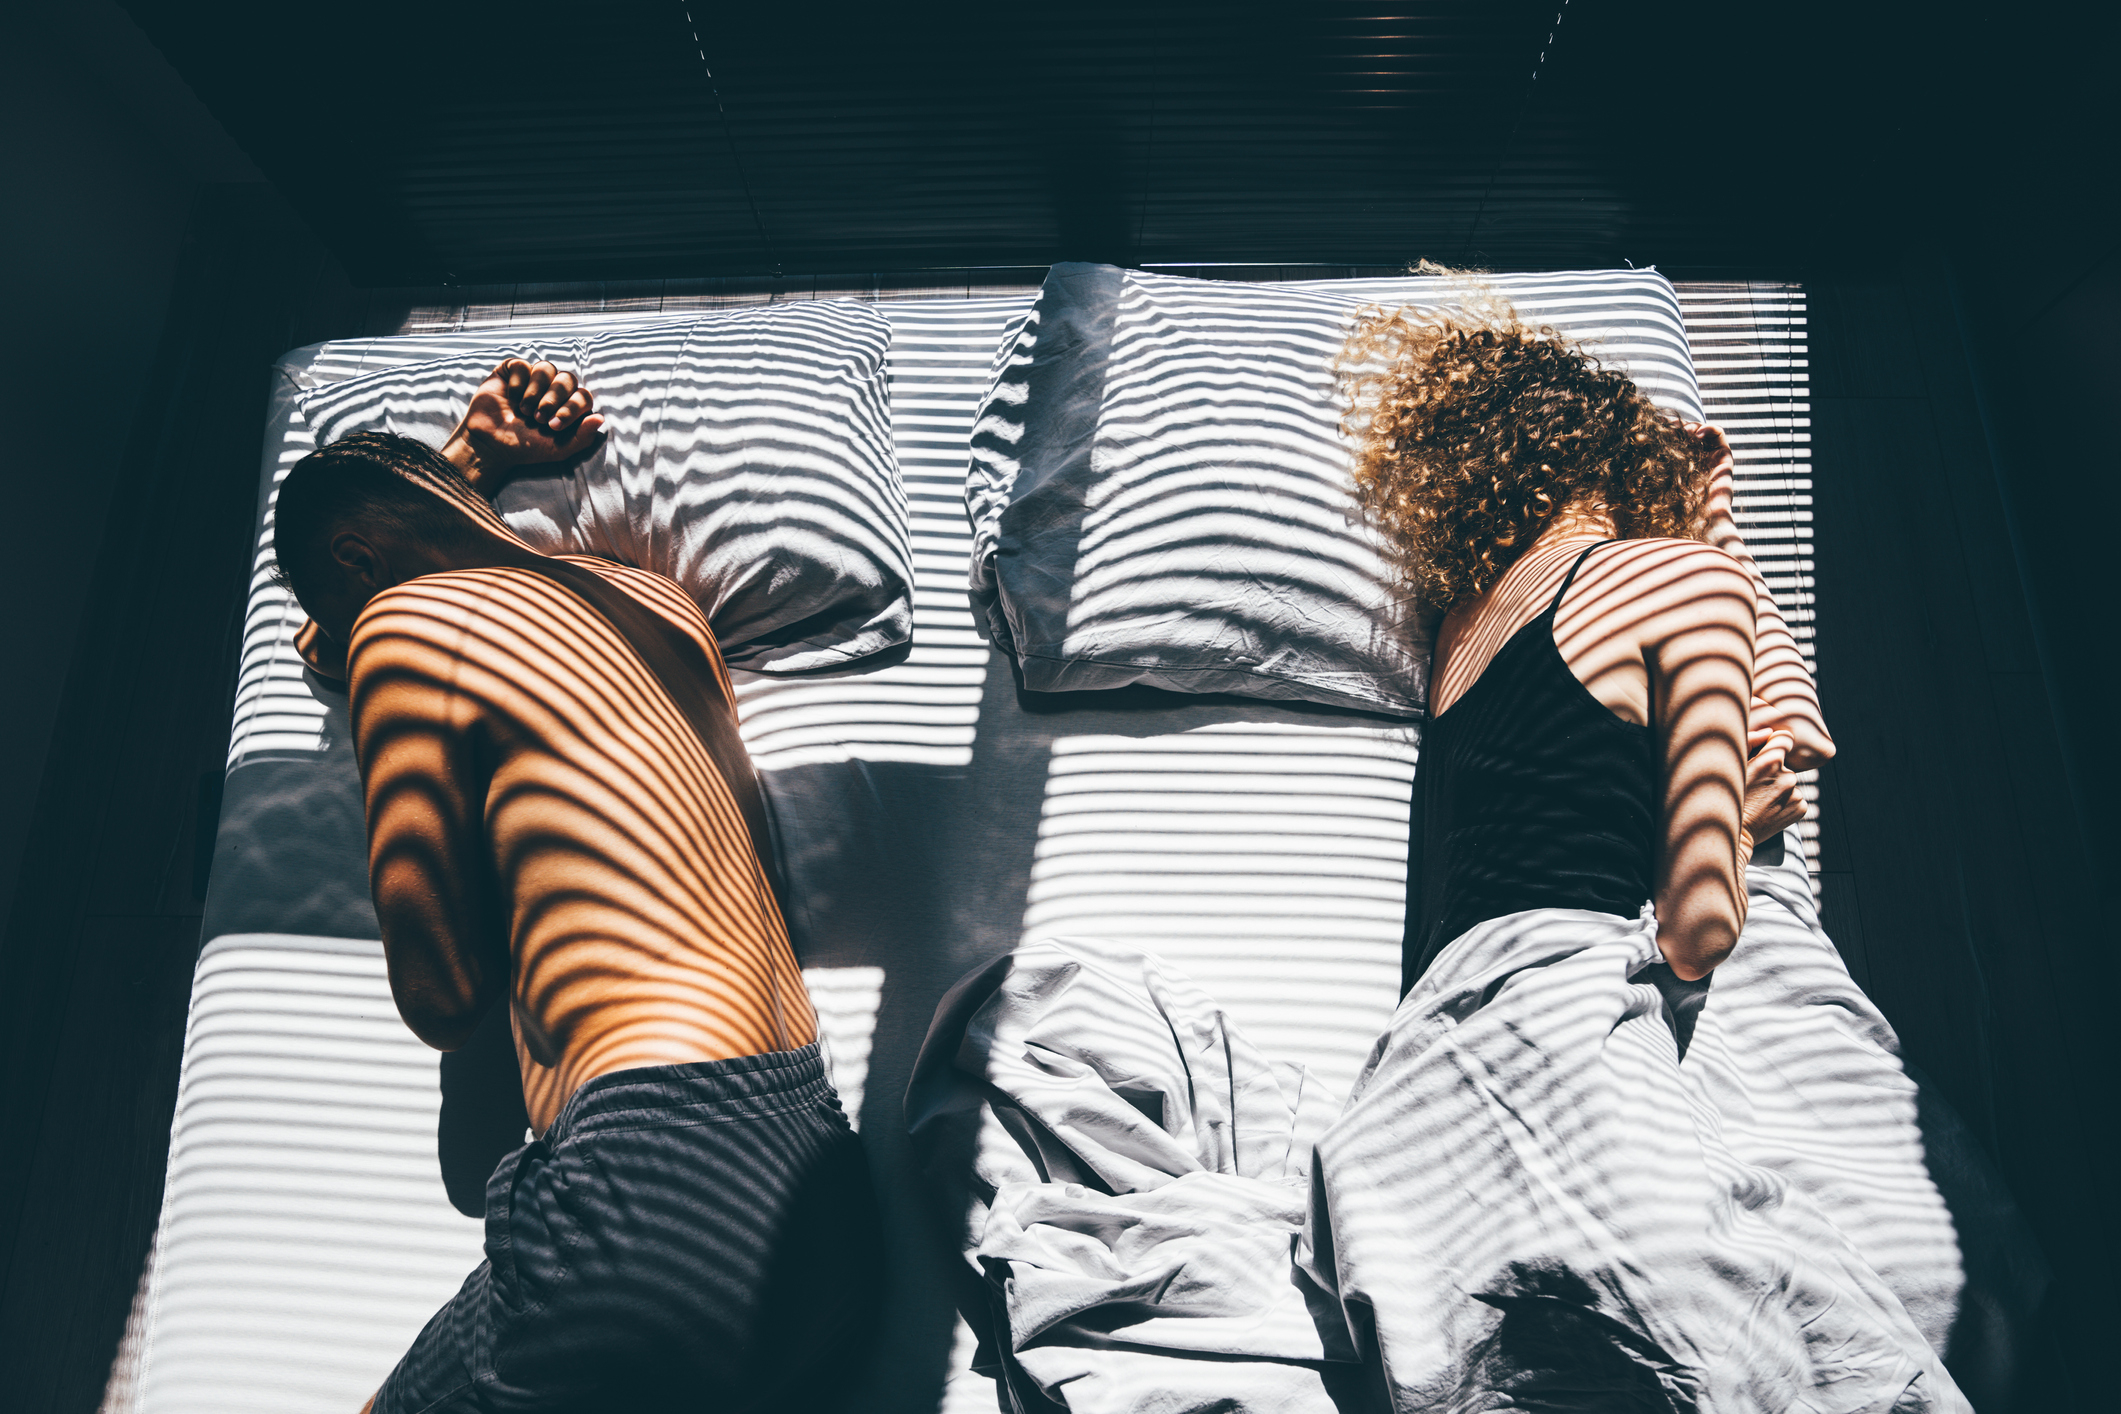 Two people lying in bed with striped shadows cast across them, suggesting intimacy and connection